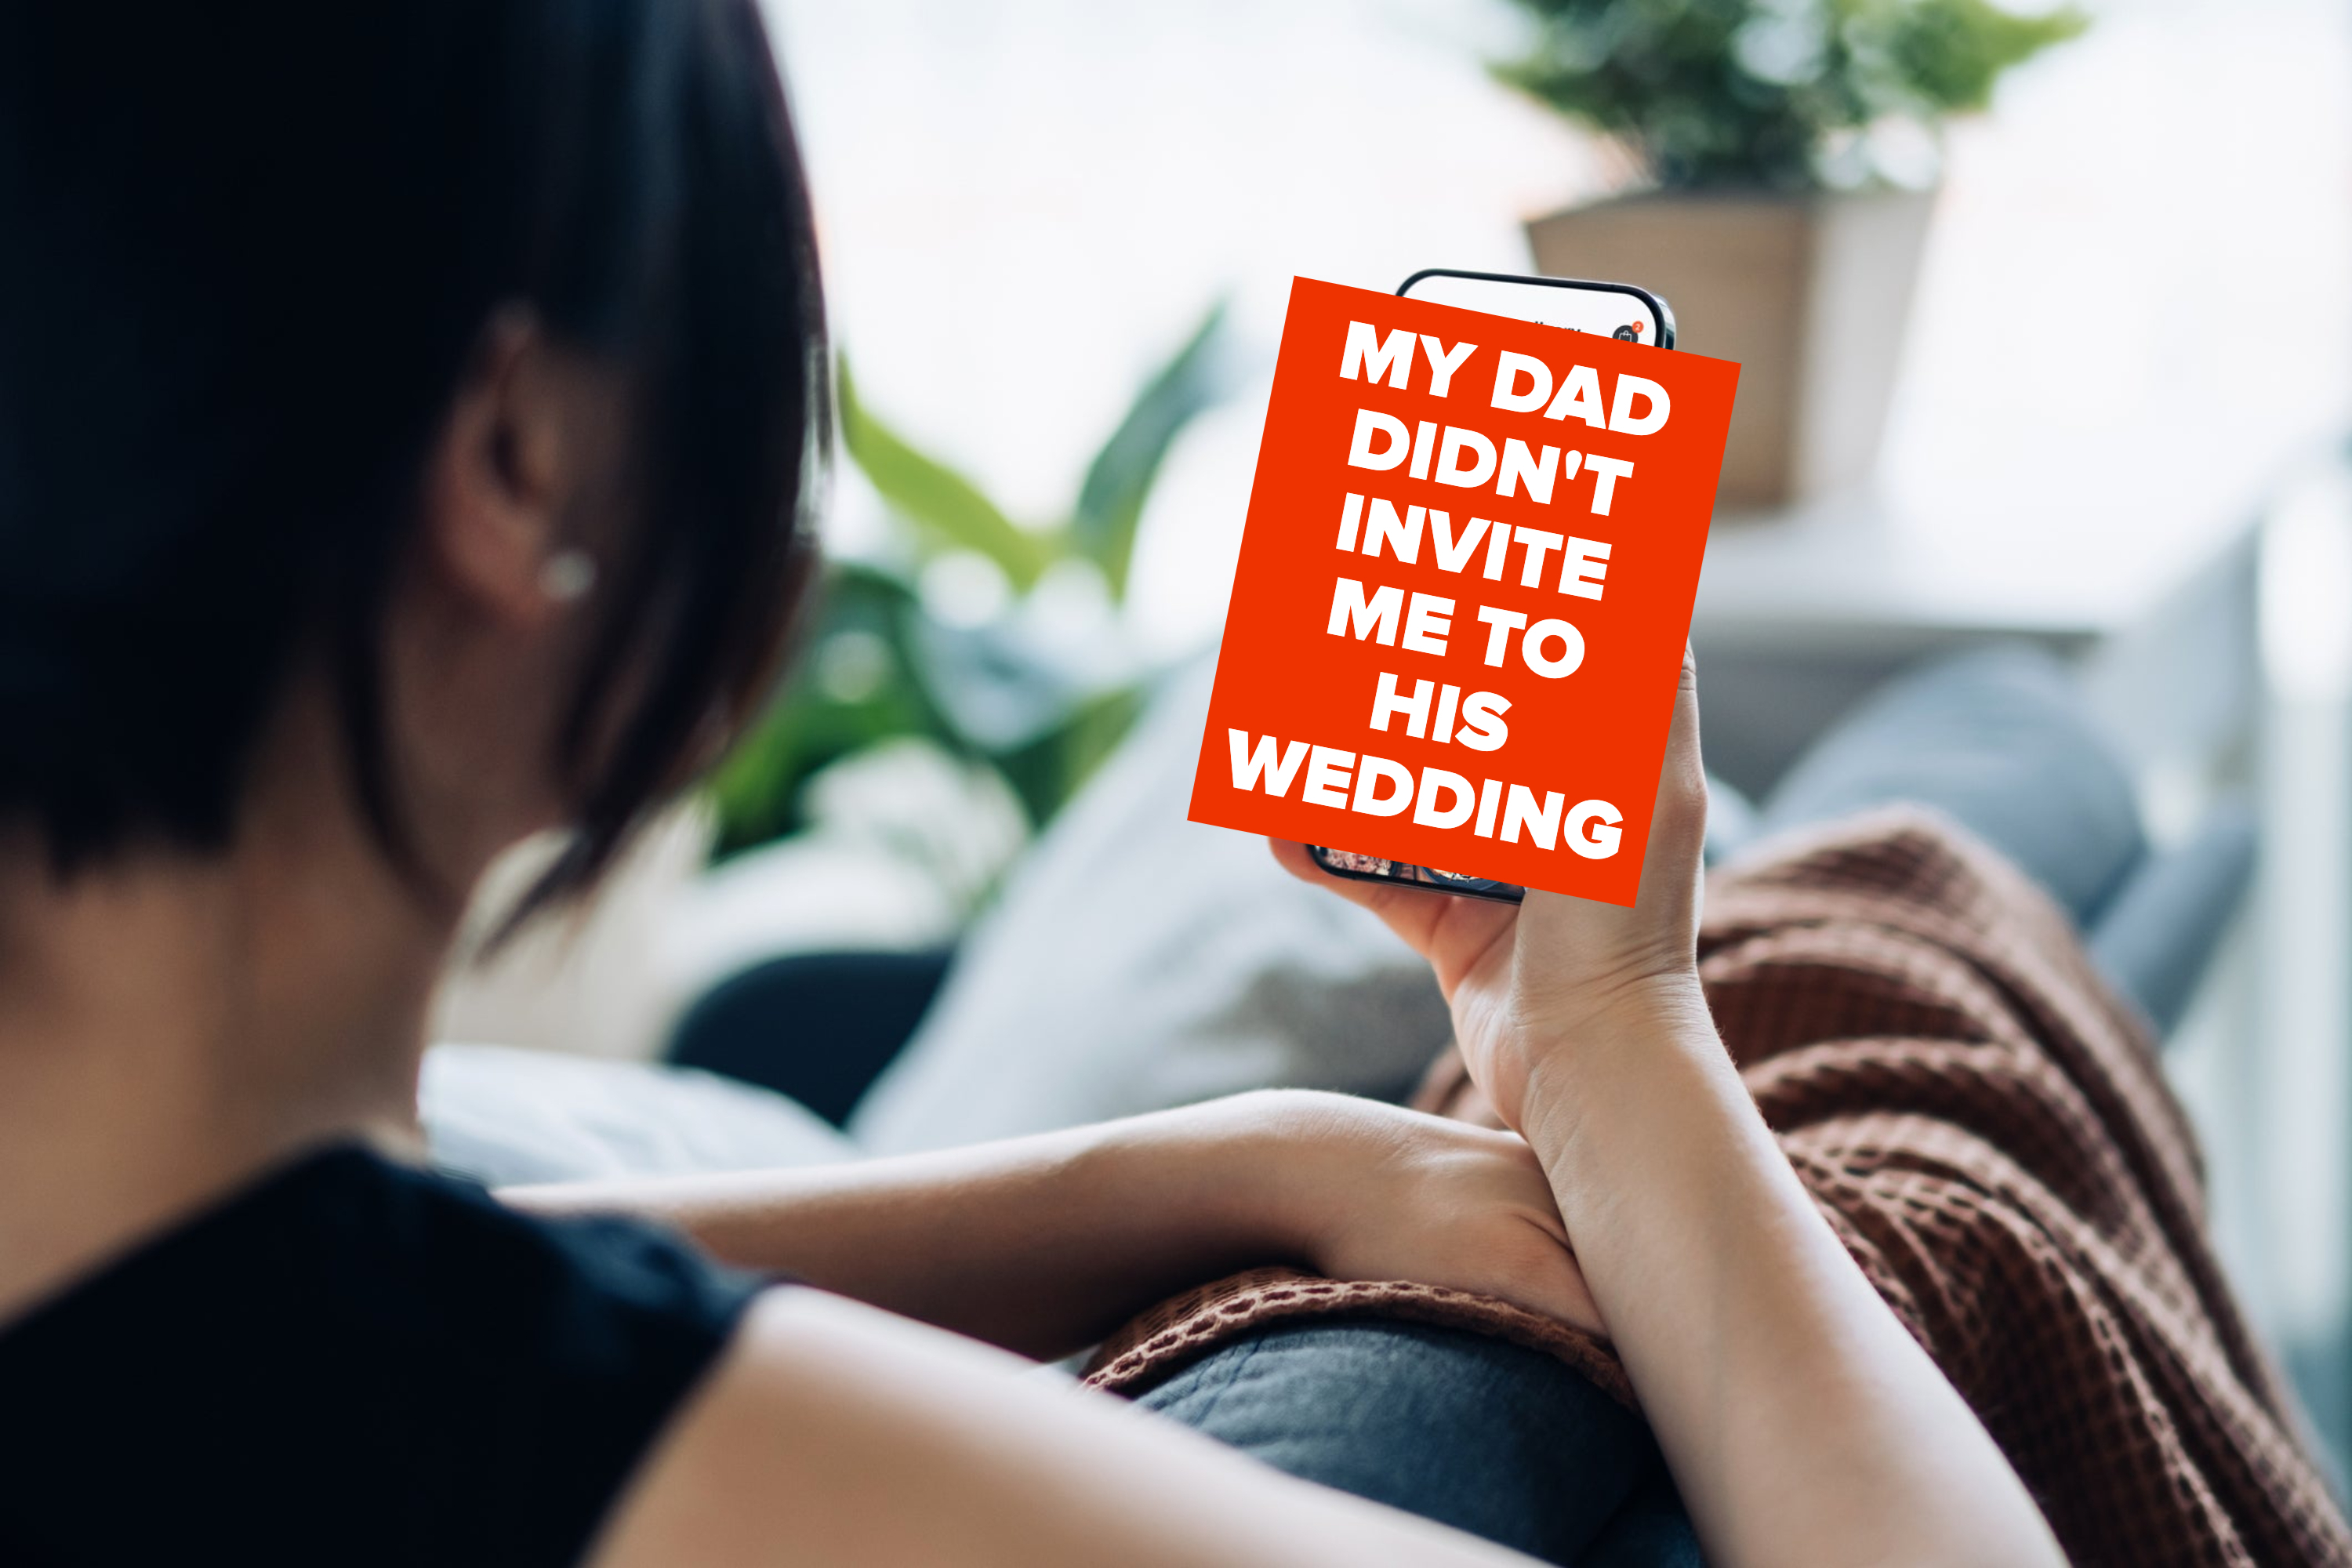 &quot;My dad didn&#x27;t invite me to his wedding&quot;